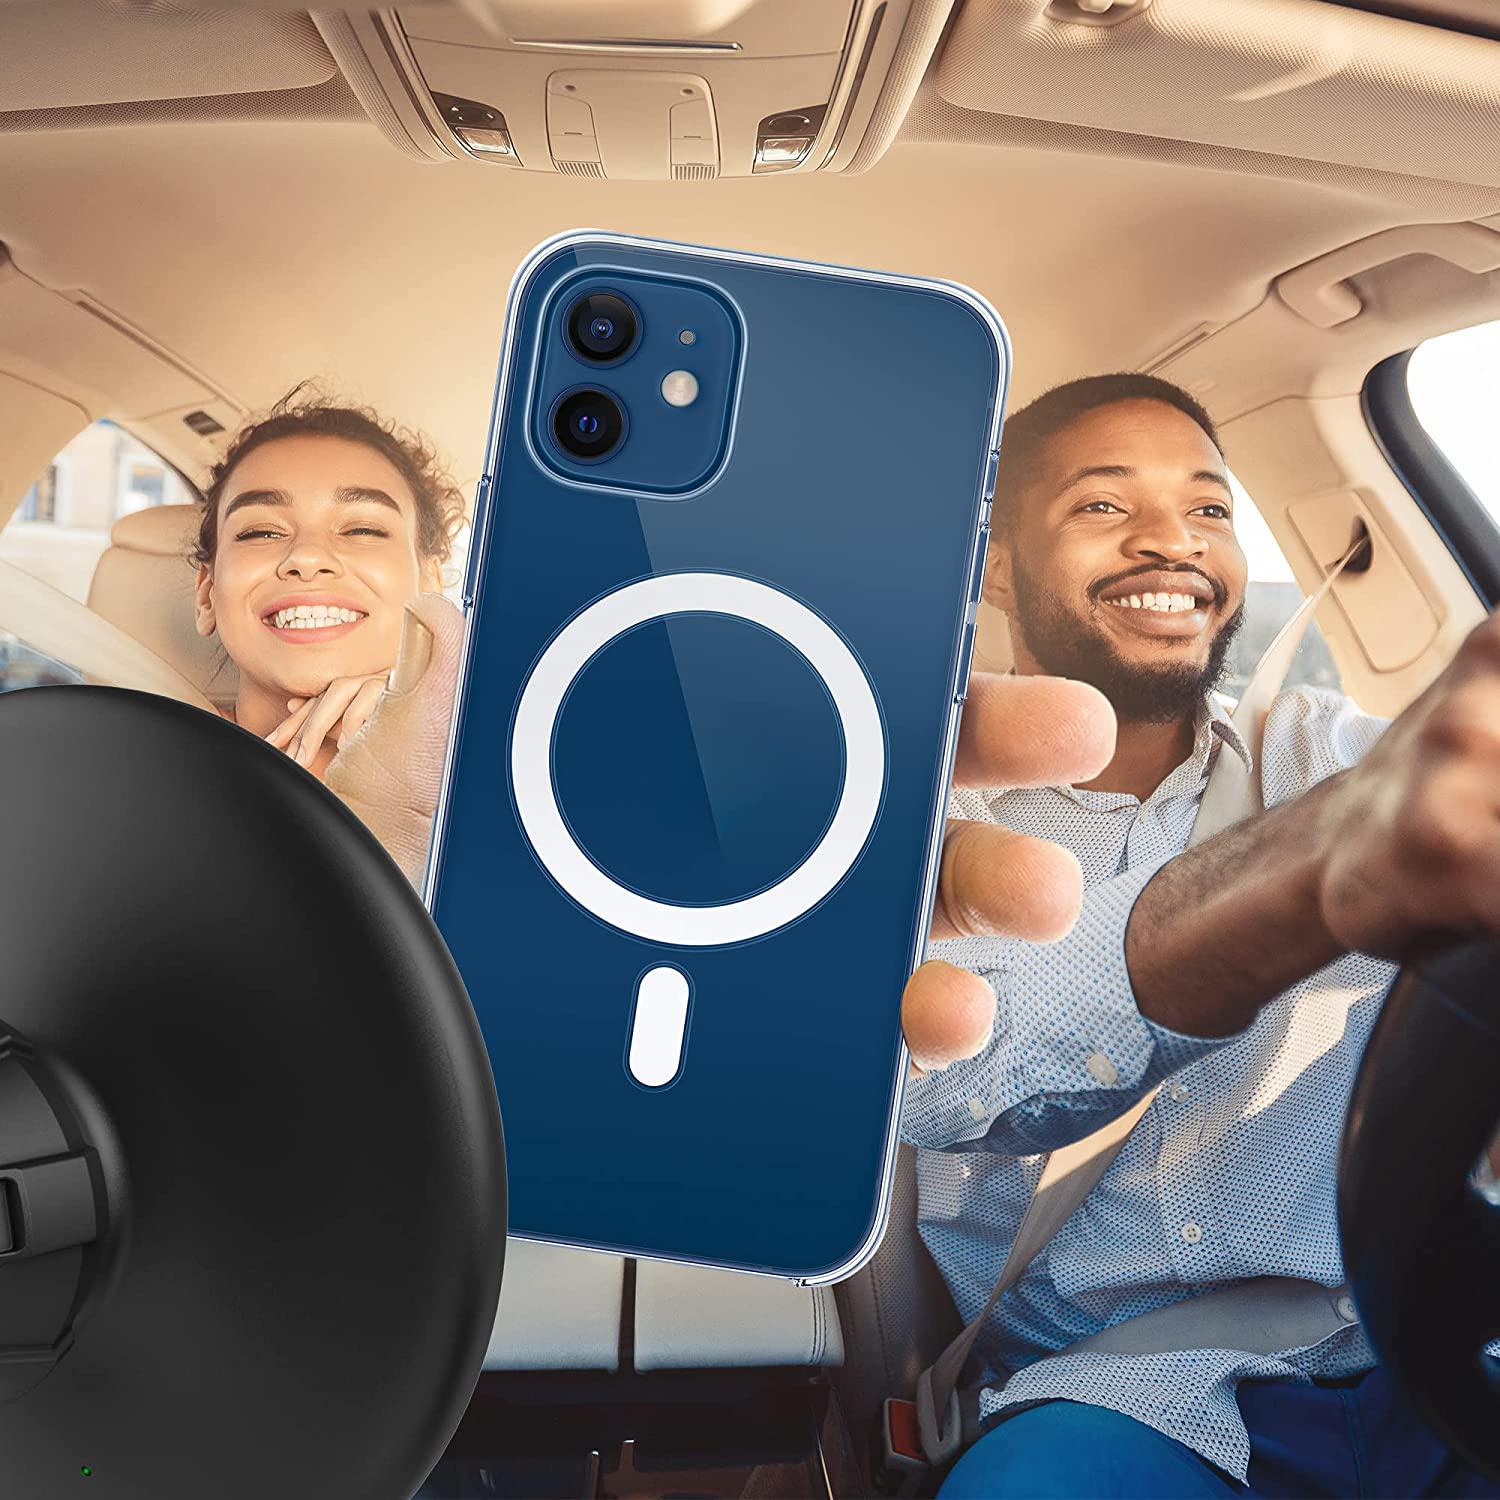 GALVANOX, Galvanox Magnetic Car Mount Phone Holder with Wireless Charging - MagSafe Compatible Fast Charging for iPhone 12,13,14 Pro/Max (15W Charger Included)